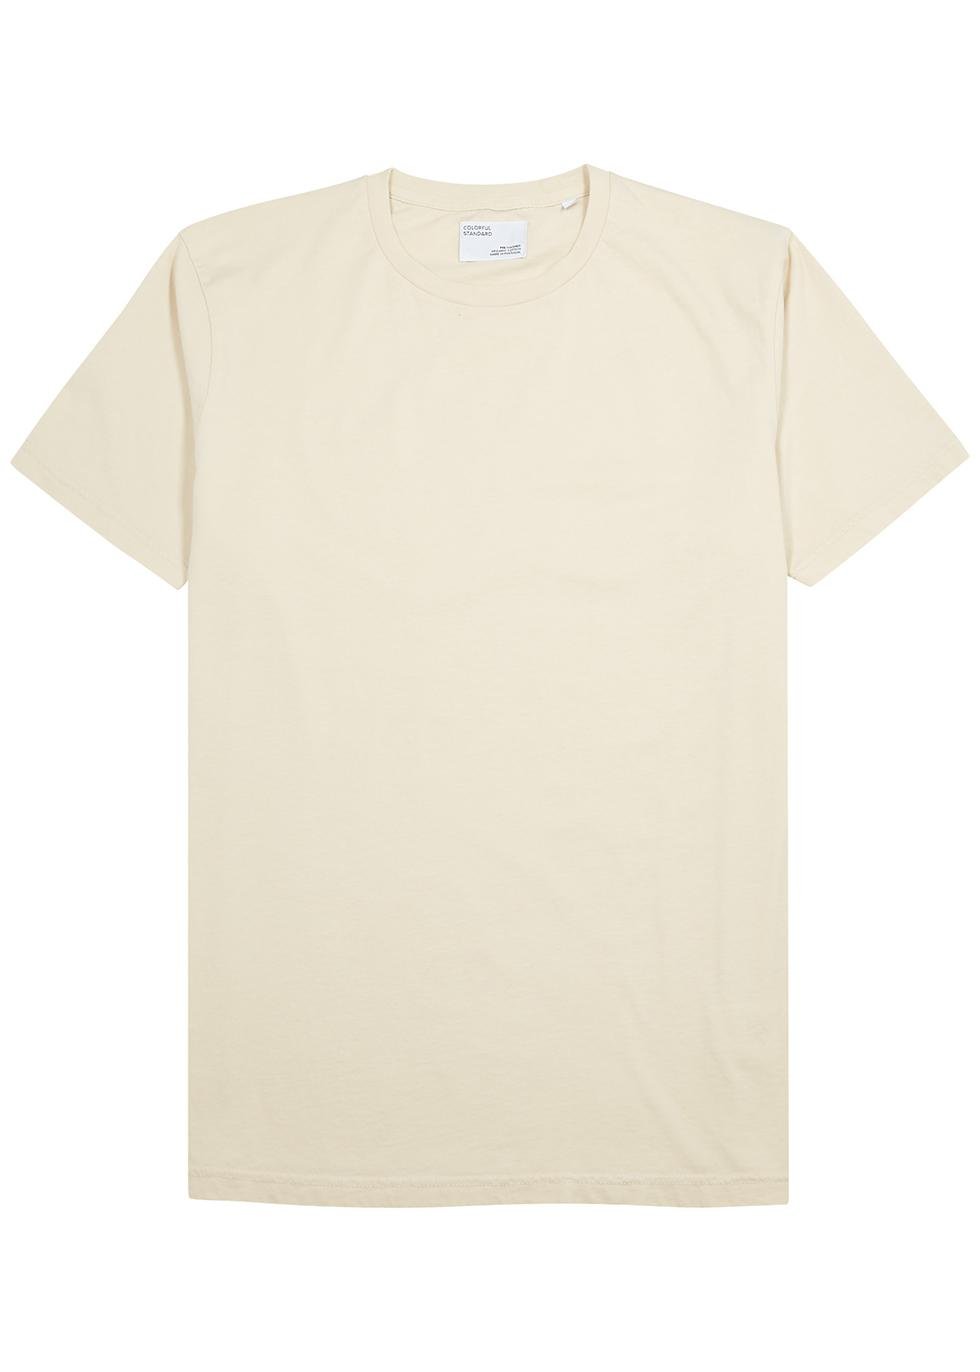 Cotton T-shirt by COLORFUL STANDARD